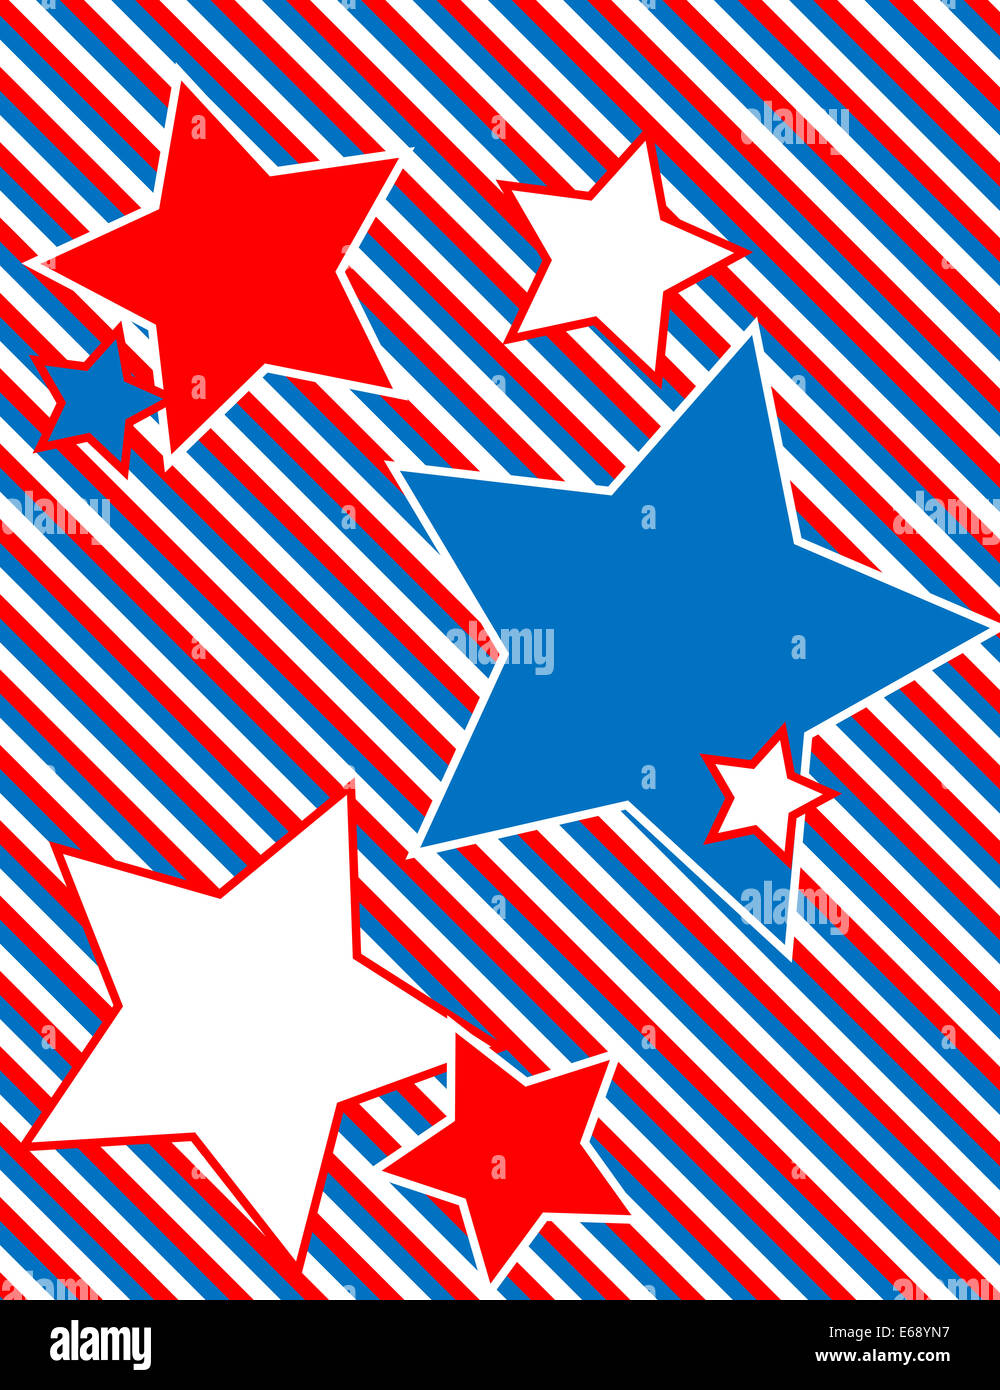 Red White And Blue Patriotic Star Background With A Striped